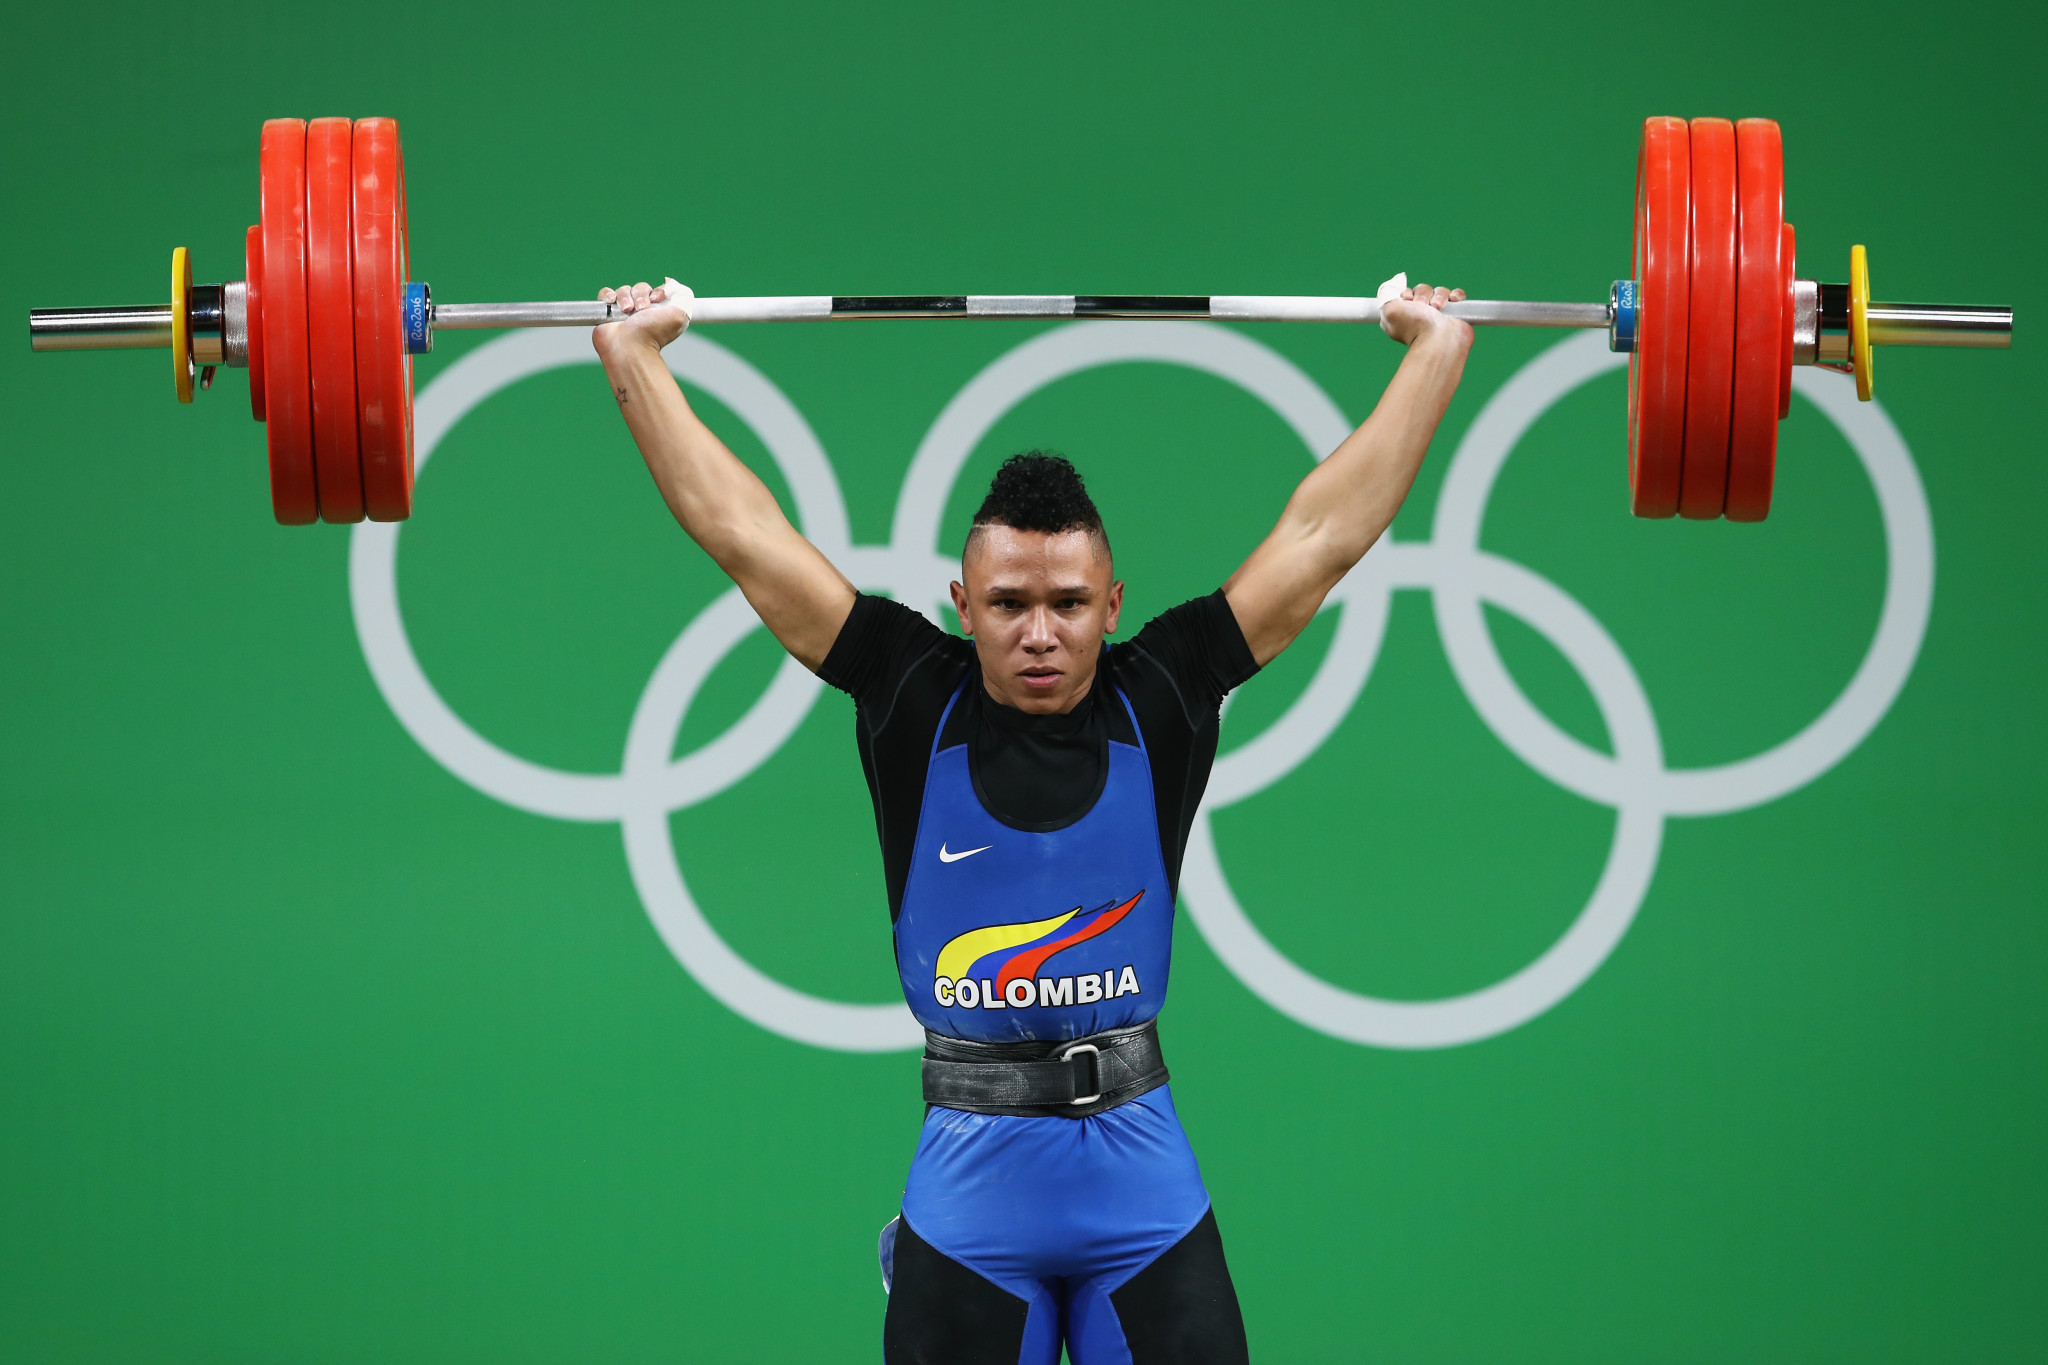 Luis Javier Mosquera is moving up to the men's 73 kilograms category in Havana ©Getty Images